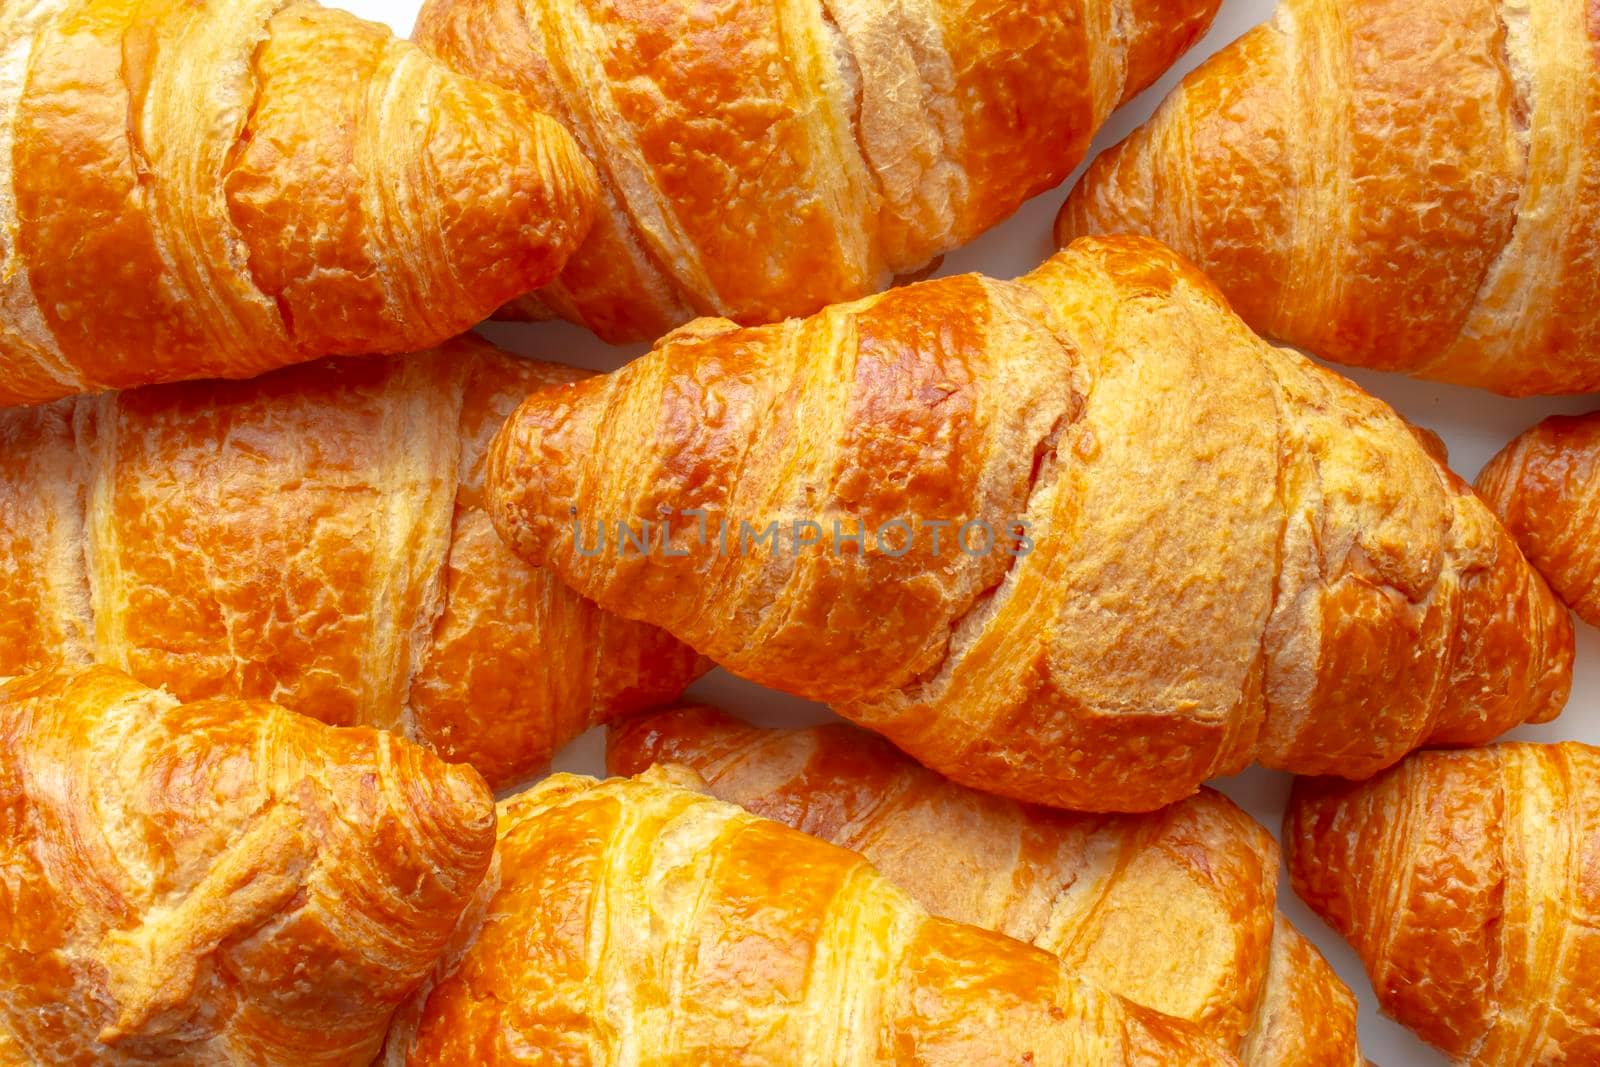 Several Croissants, crescent shape and, like other viennoiserie, are made of a layered yeast-leavened dough. by oasisamuel